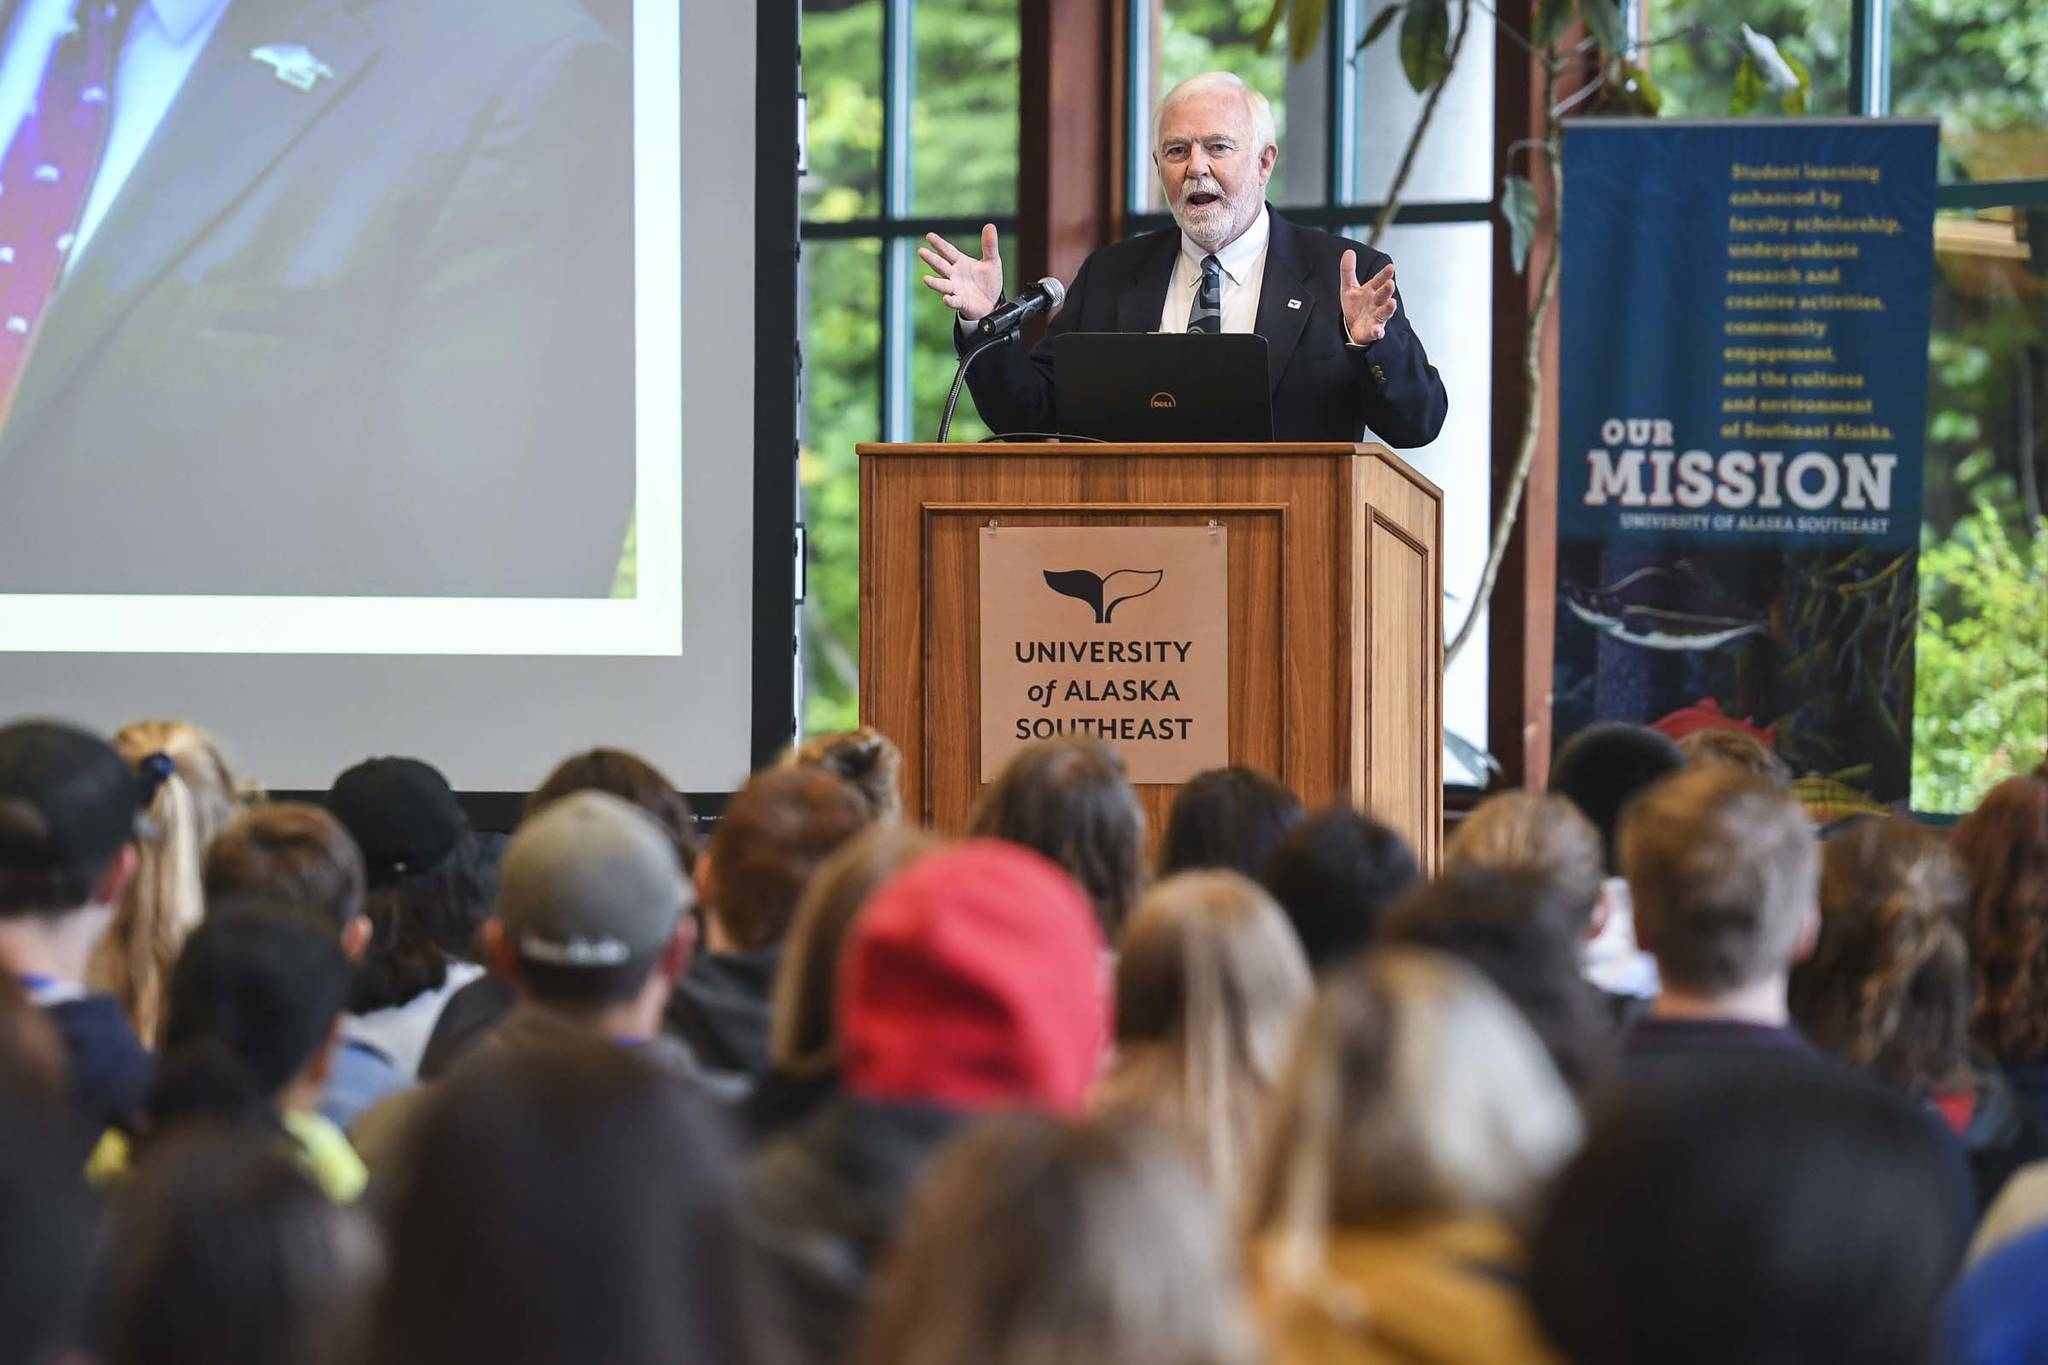 Chancellor Dr. Richard Caulfield speaks to freshmen students during a convocation at the University of Alaska Southeast on Friday, Aug. 23, 2019. Classes start Monday, Aug. 26. (Michael Penn | Juneau Empire)